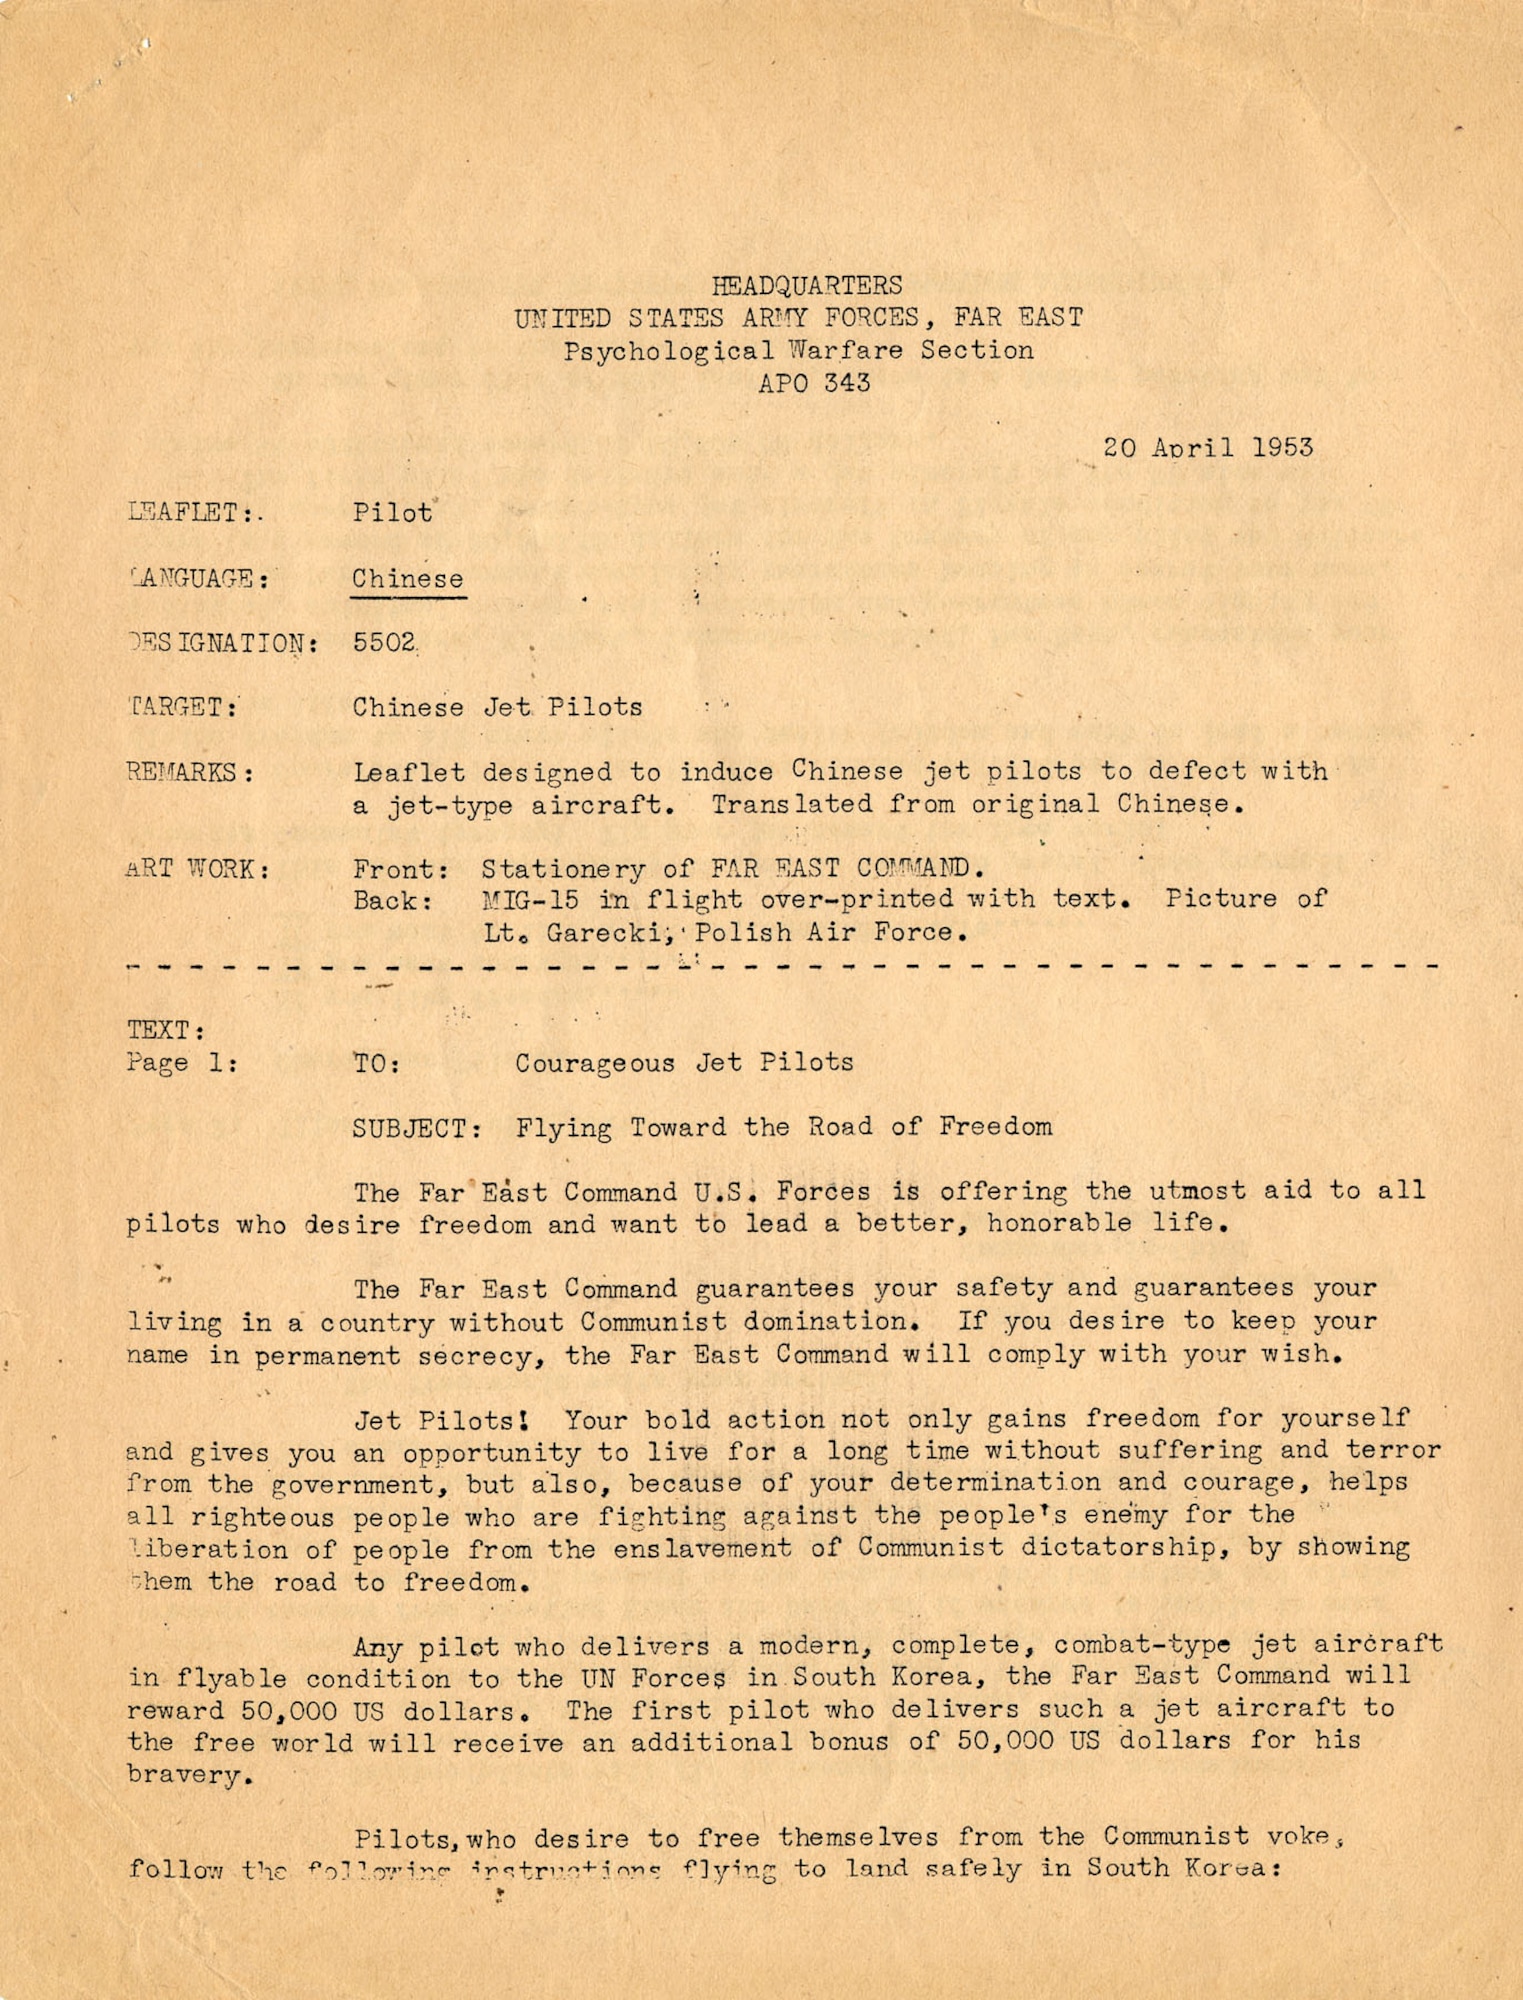 Copies of the memorandum that created the MiG reward leaflet. This memorandum explains why it was made and gives the English translation. (U.S. Air Force photo)